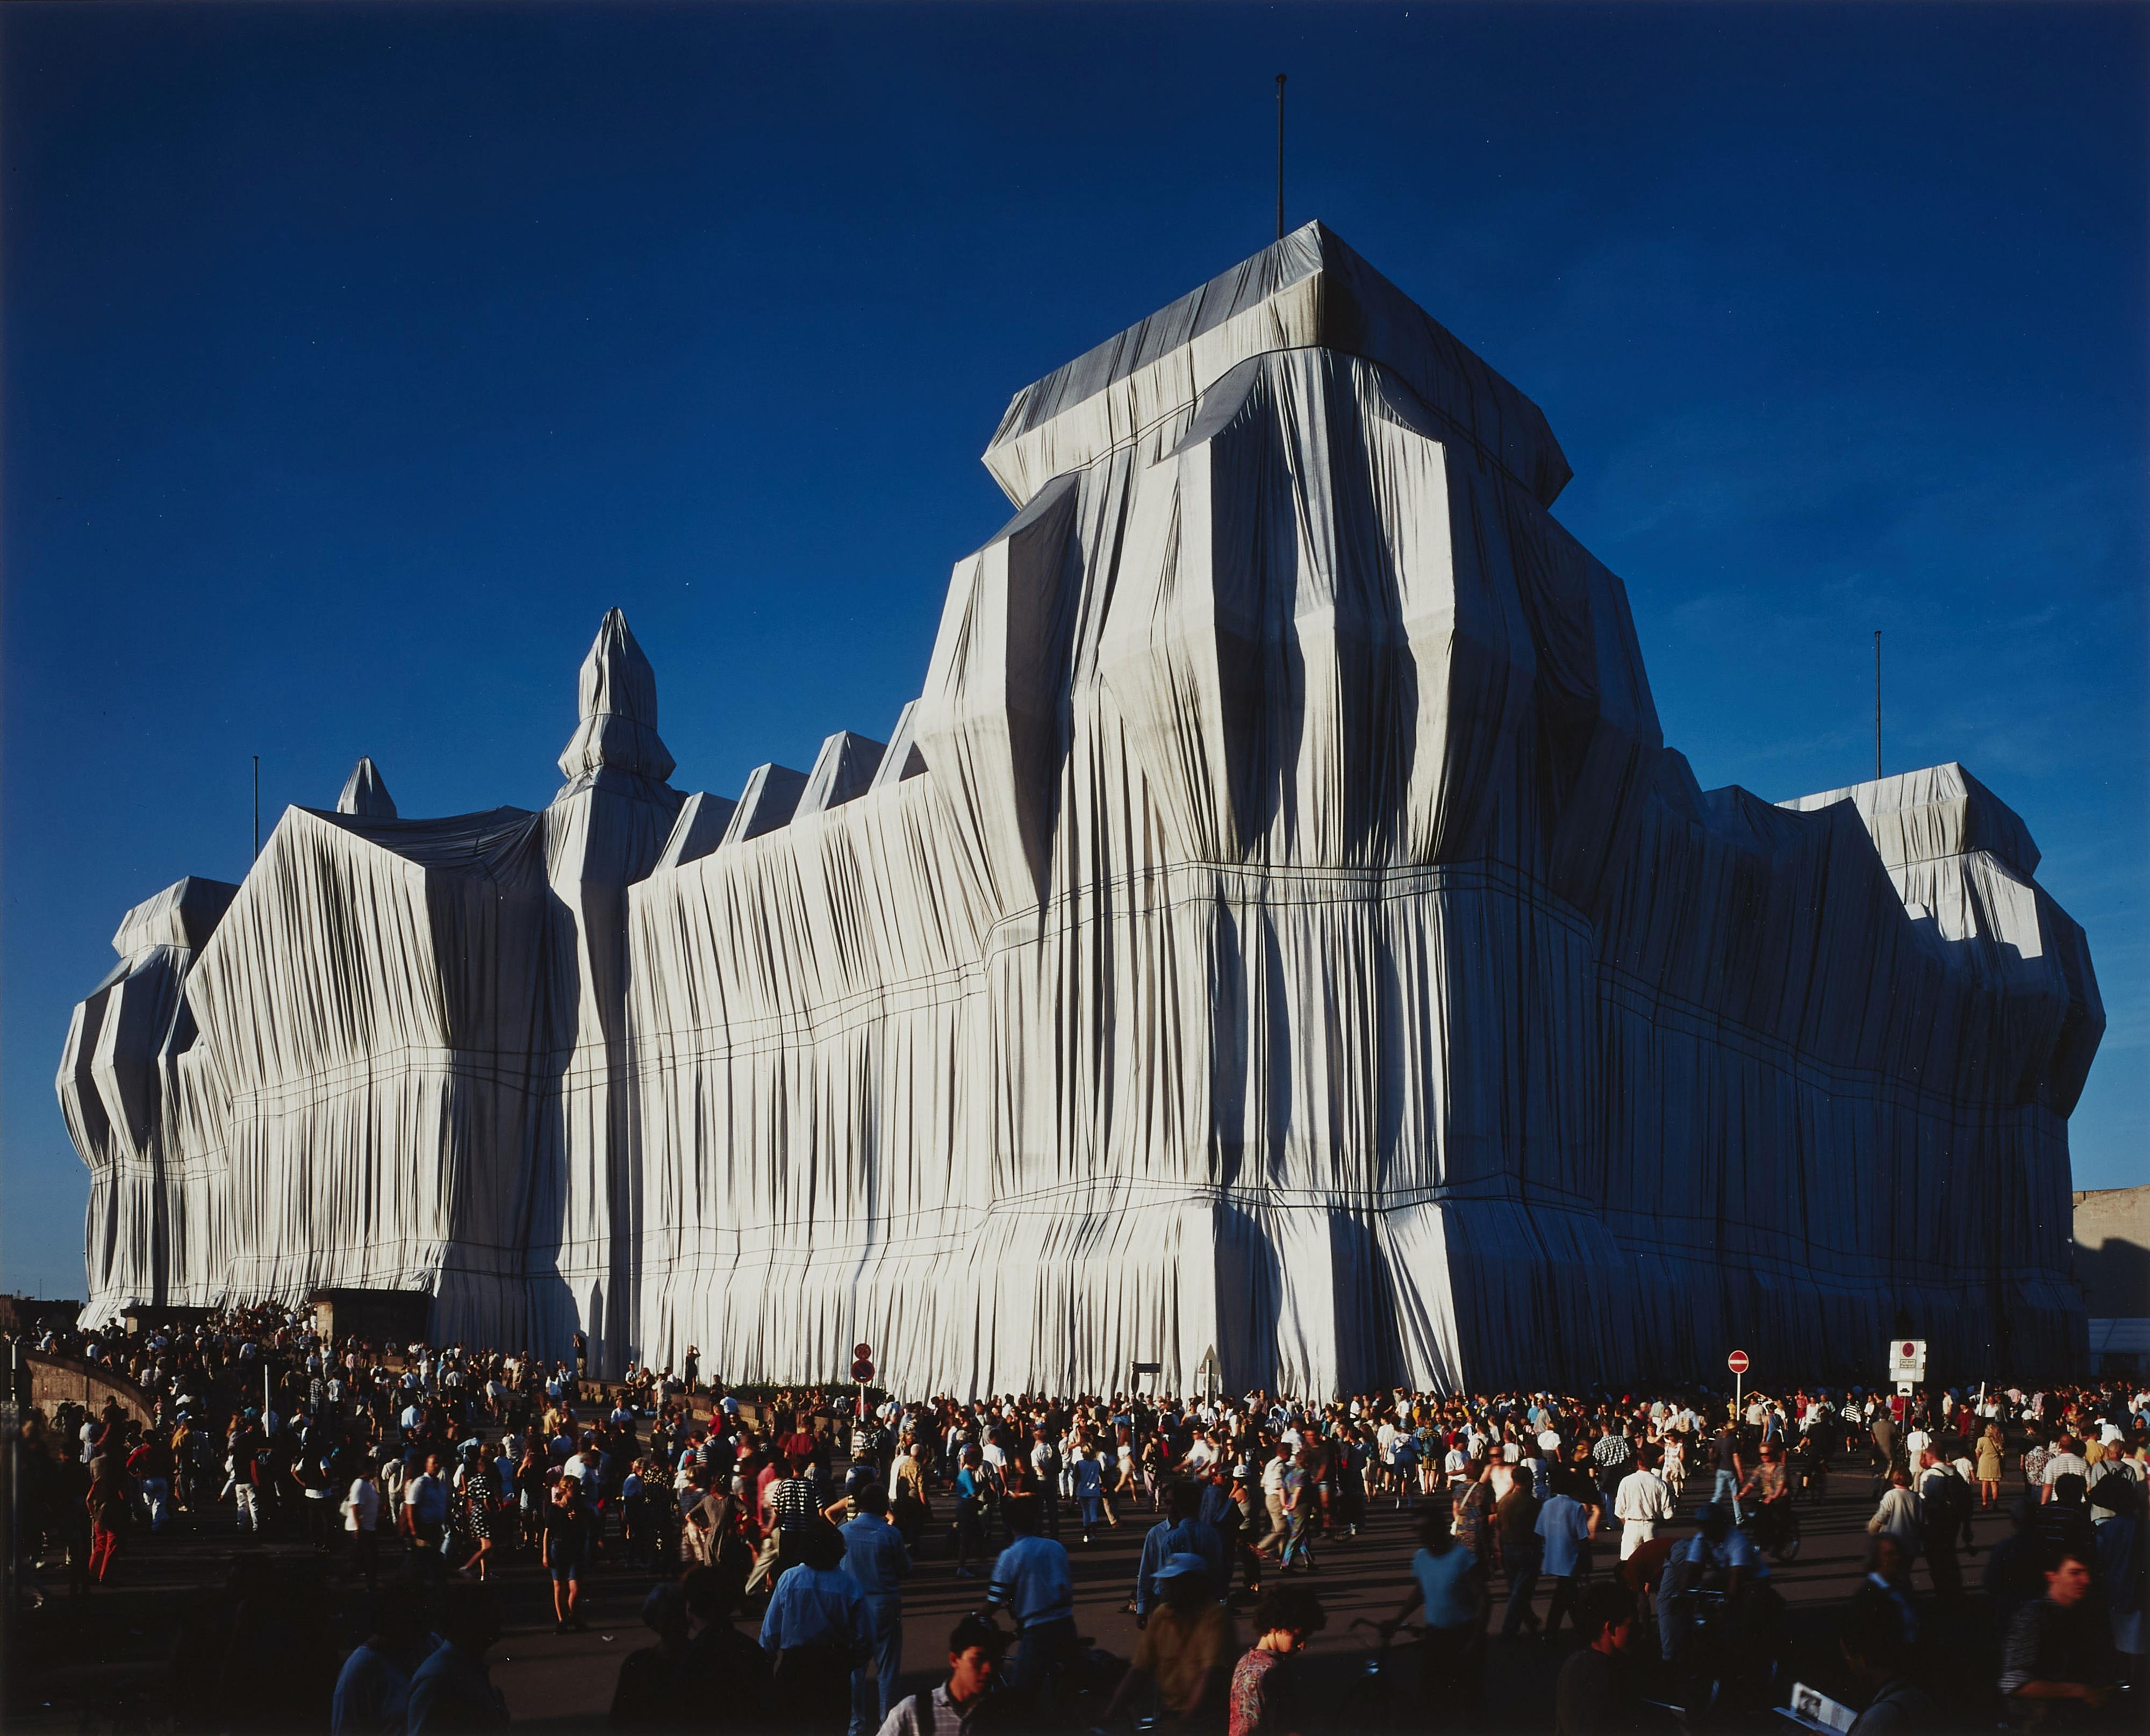 Christo & Jeanne Claude
Wolfgang Volz - Wrapped Reichstag Berlin - image-3